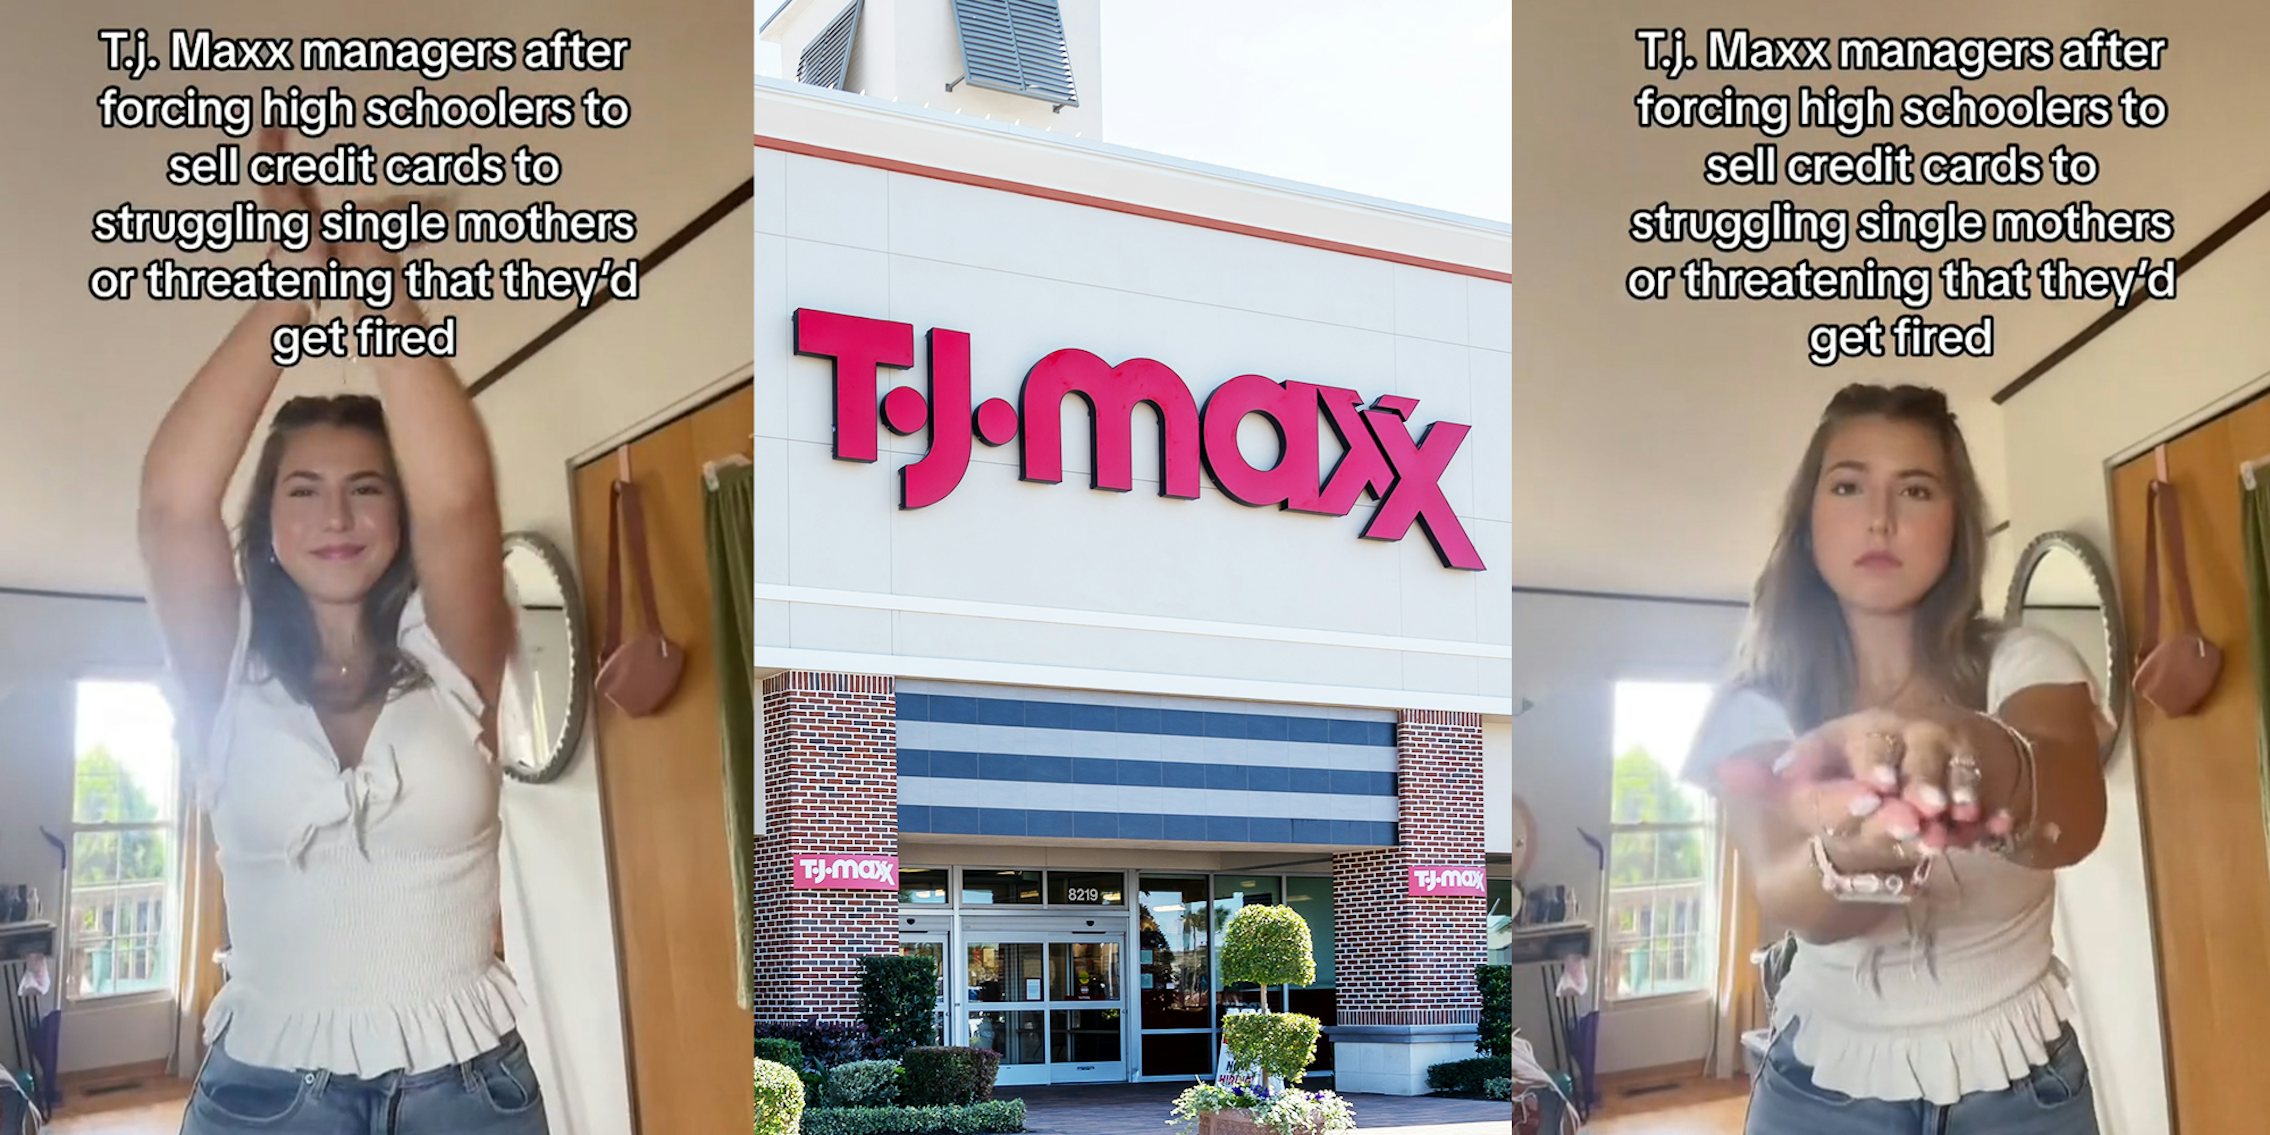 TJ Maxx customer calls out manager for pushing credit cards